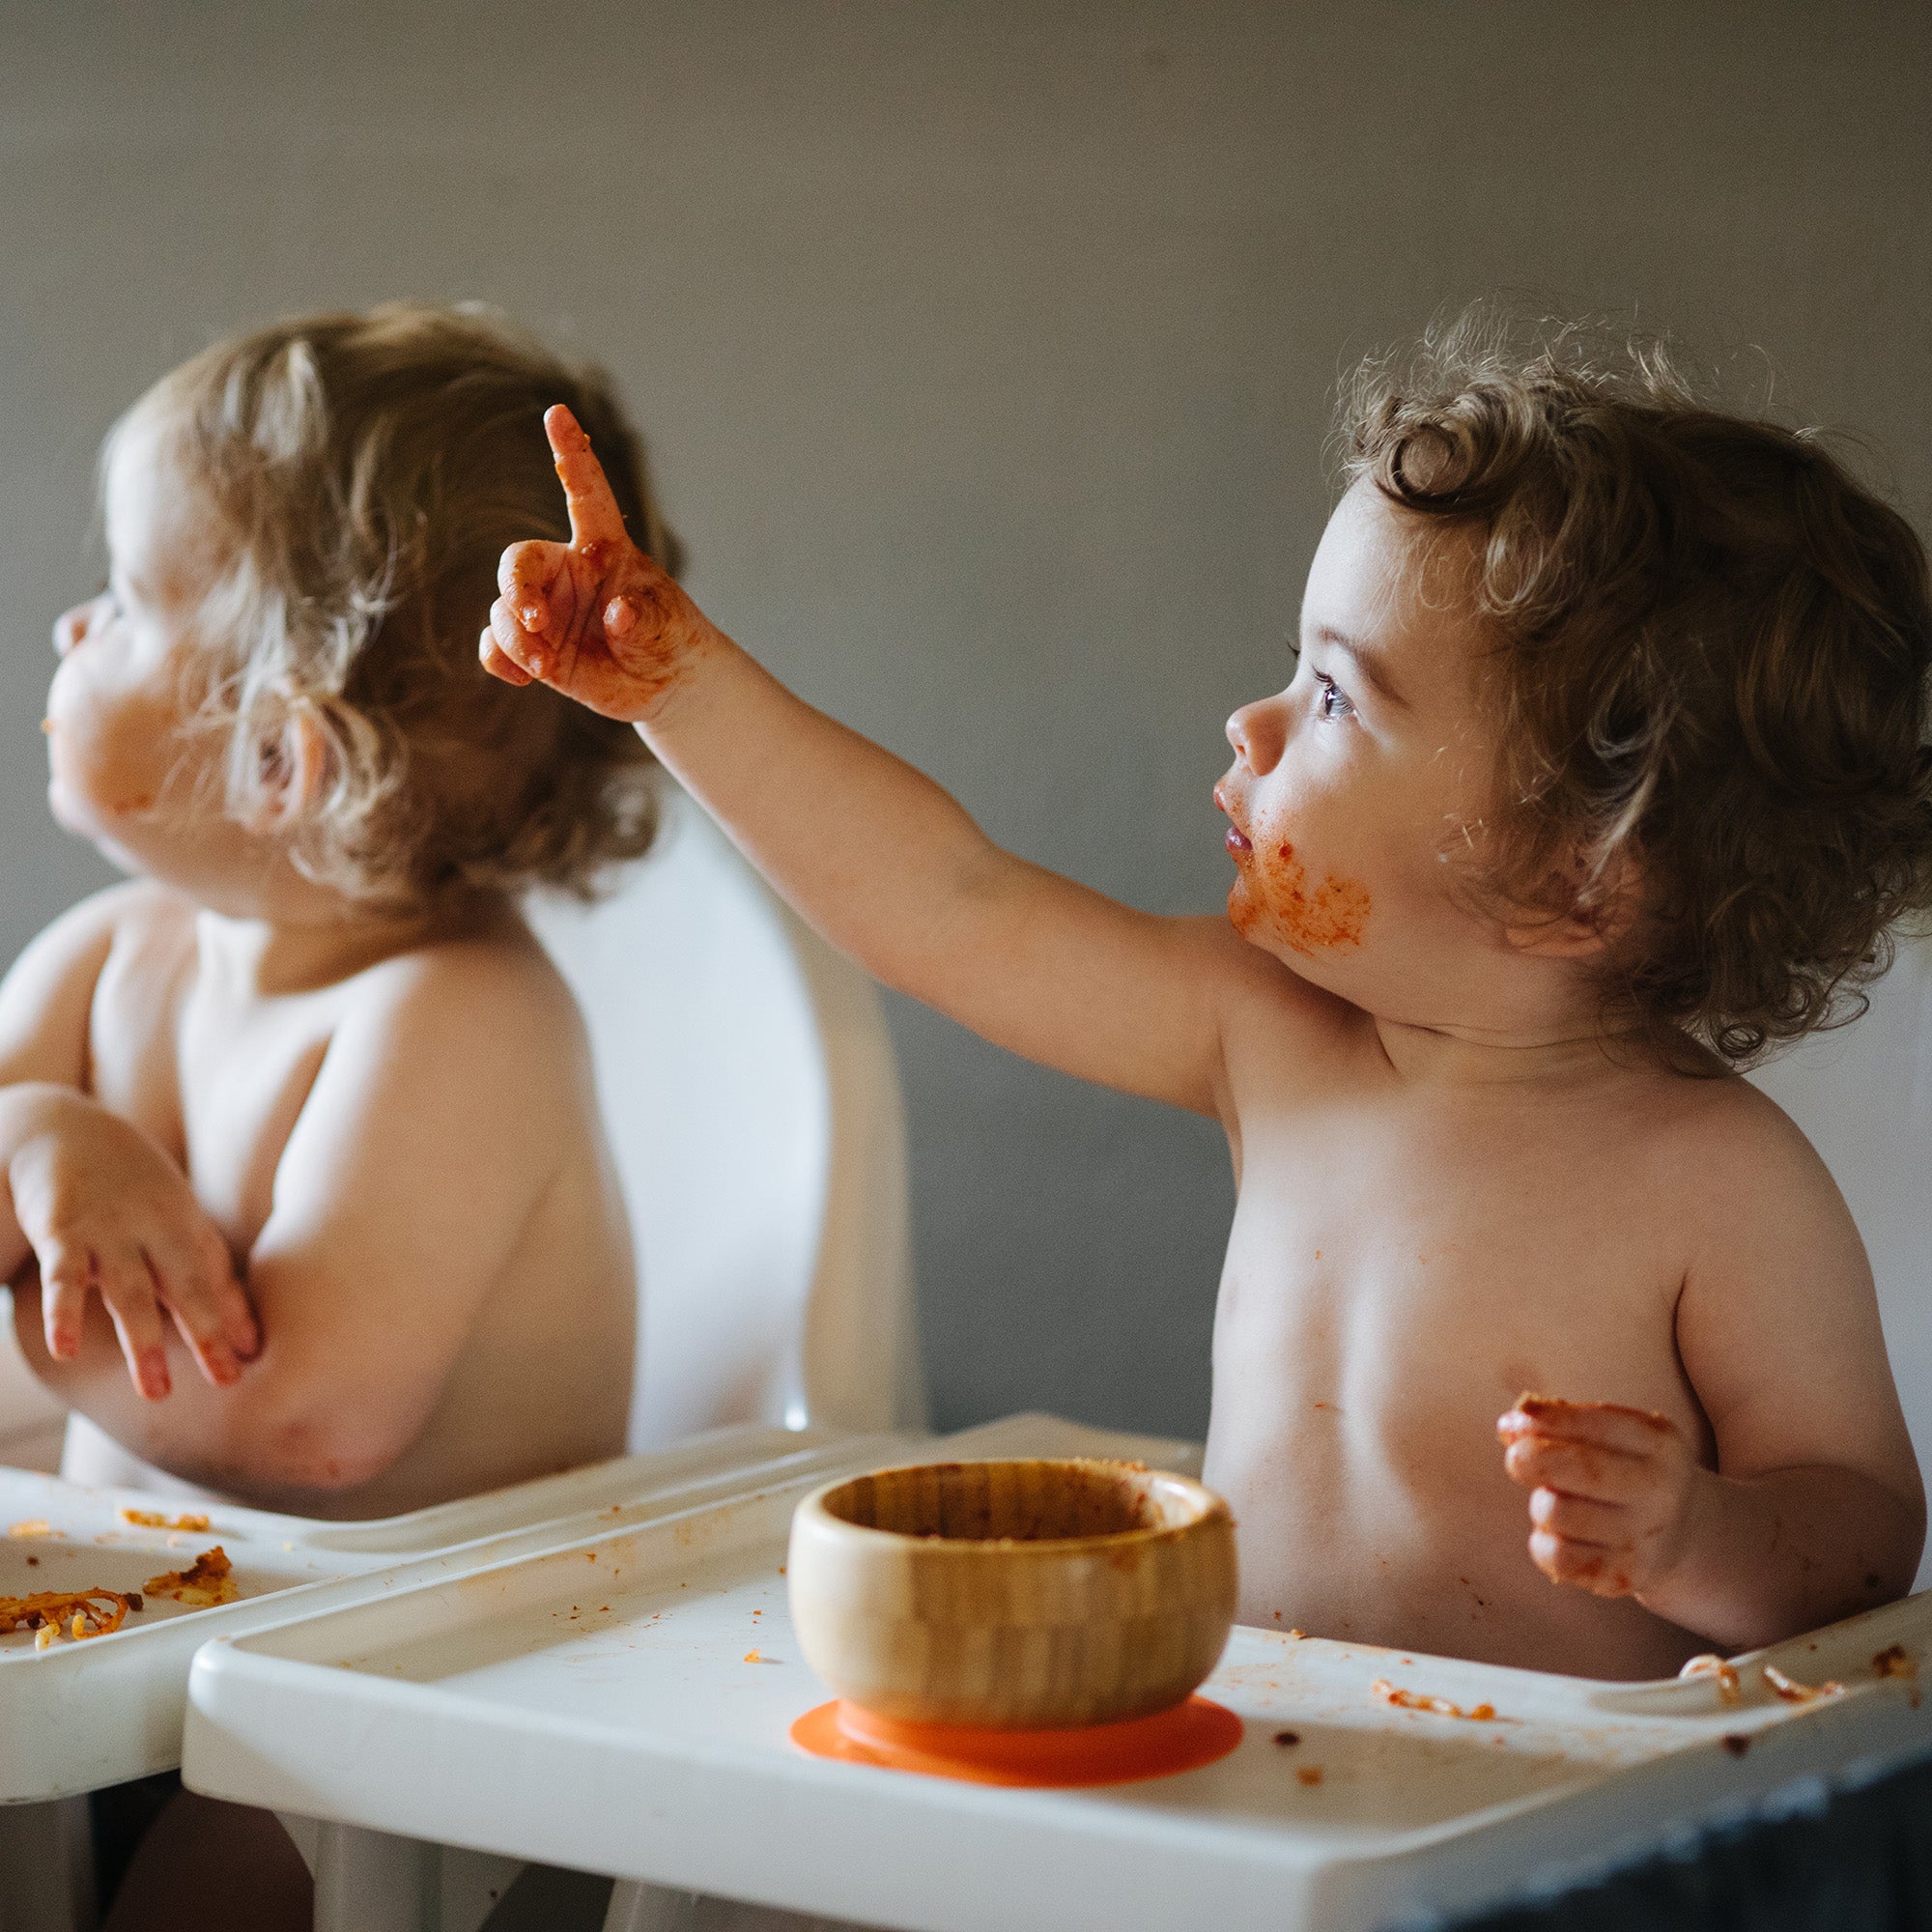 Introducing Pasta to Babies: A Simple Guide